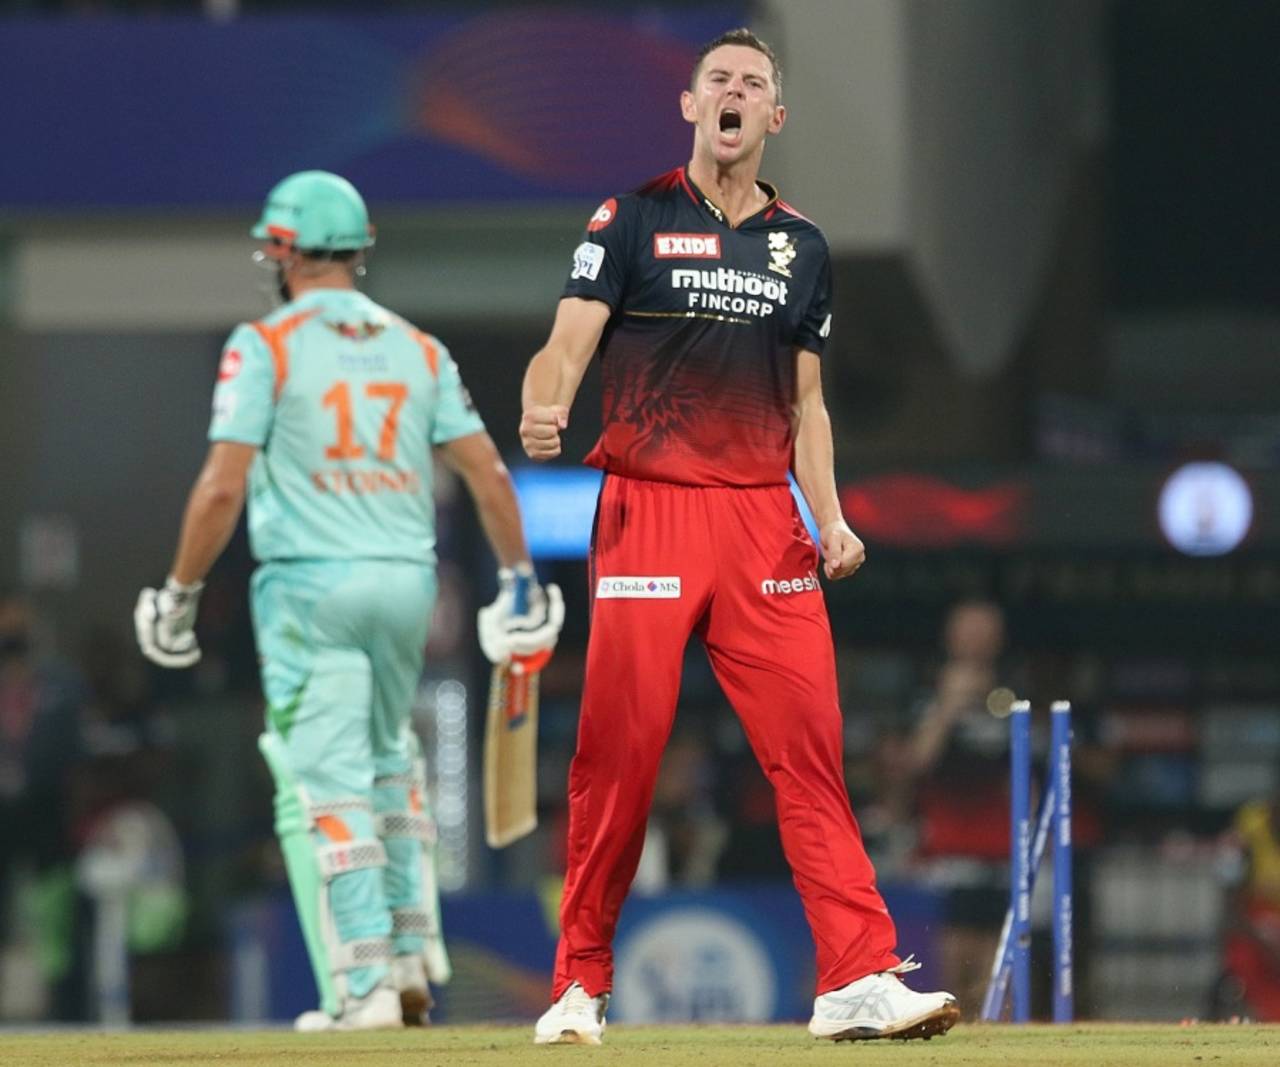 Josh Hazlewood is pumped up after removing Marcus Stoinis, Lucknow Super Giants vs Royal Challengers Bangalore, IPL 2022, DY Patil, Navi Mumbai, April 19, 2022